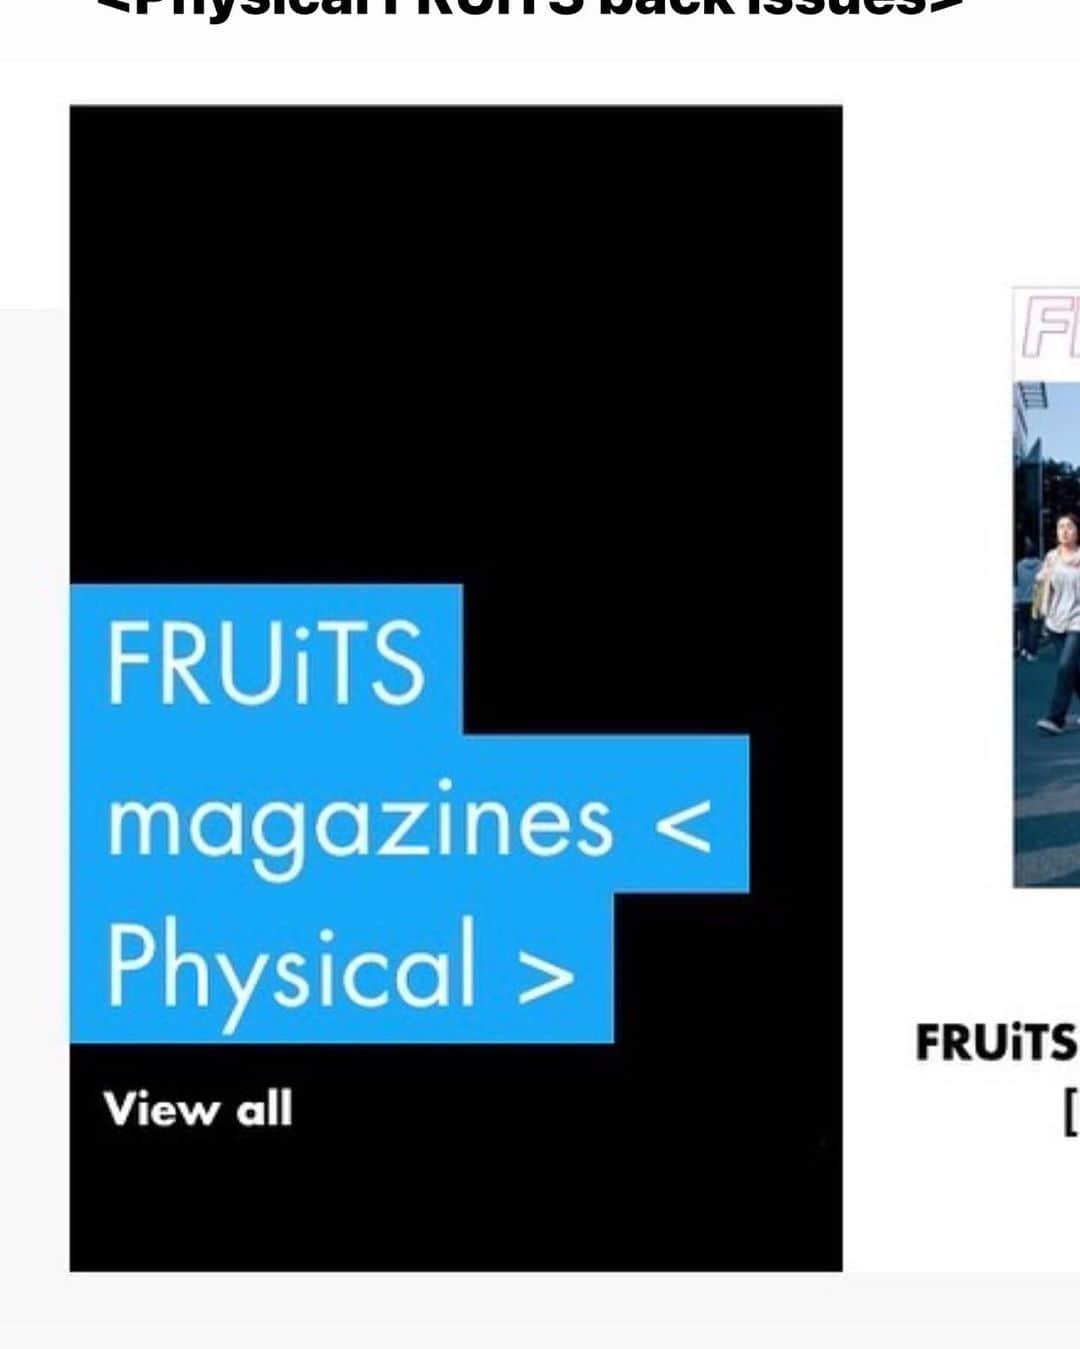 FRUiTSのインスタグラム：「<Physical FRUiTS back issues>  Now that Covid-19 has dawned and international mail has been restored, we have resumed online sales of physical FRUiTS back issues. We have released about 100 possible back issues, No.133 ~ No.233. Many of the issues are the last available with very few in stock, so please be quick.  FRUiTSバックナンバーのネット販売を再開しました。 約100号を公開しました。NO.133〜NO.233です。 今回で販売が最後の号も多いので、お早めに。 ドル表示ですが、国内郵送可能です。  https://tokyofruits.com/  https://tokyofruits.com/collections/fruits-magazine」